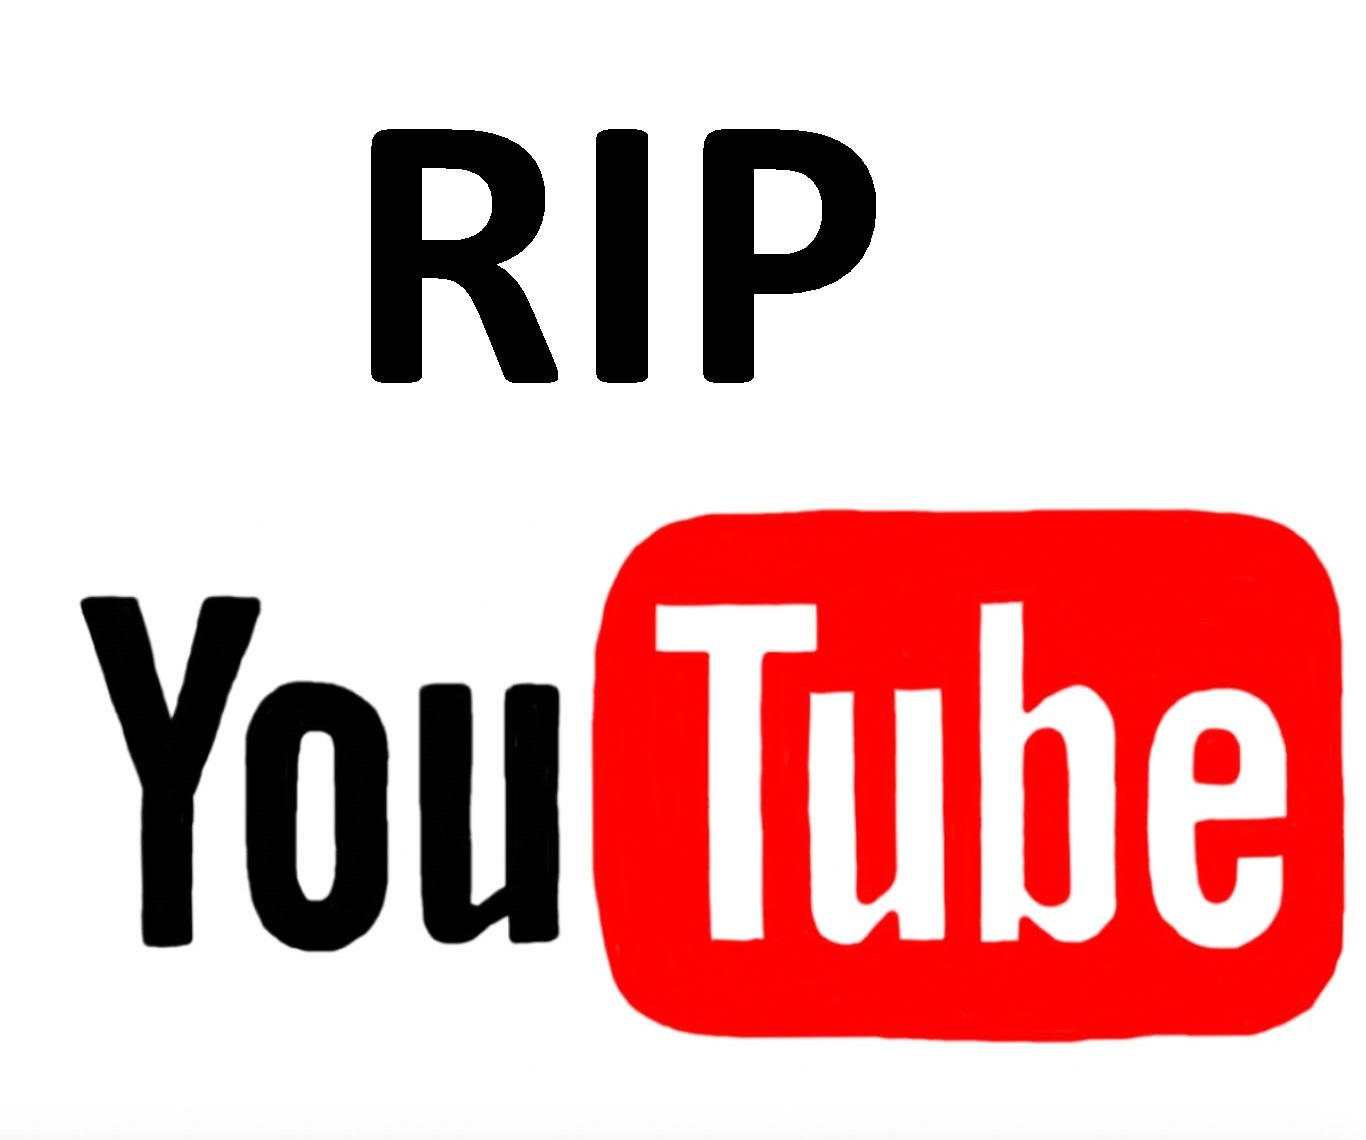 Old YouTube Logo - Only '90s kids will remember the old YouTube logo